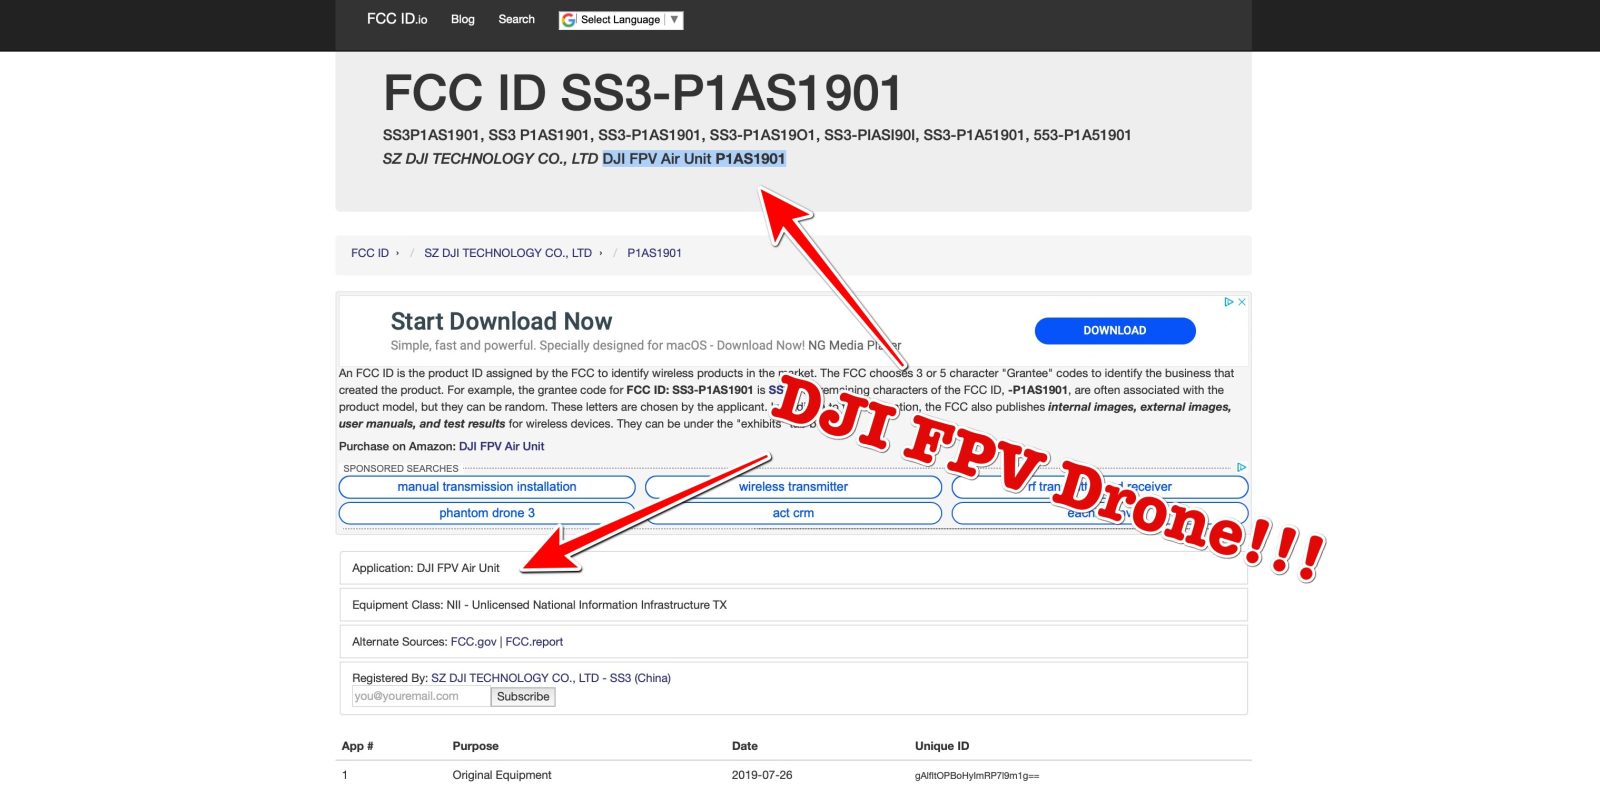 DJI-will-release-FPV-drone-goggles-and-remote-control-say-FCC-filings.jpg